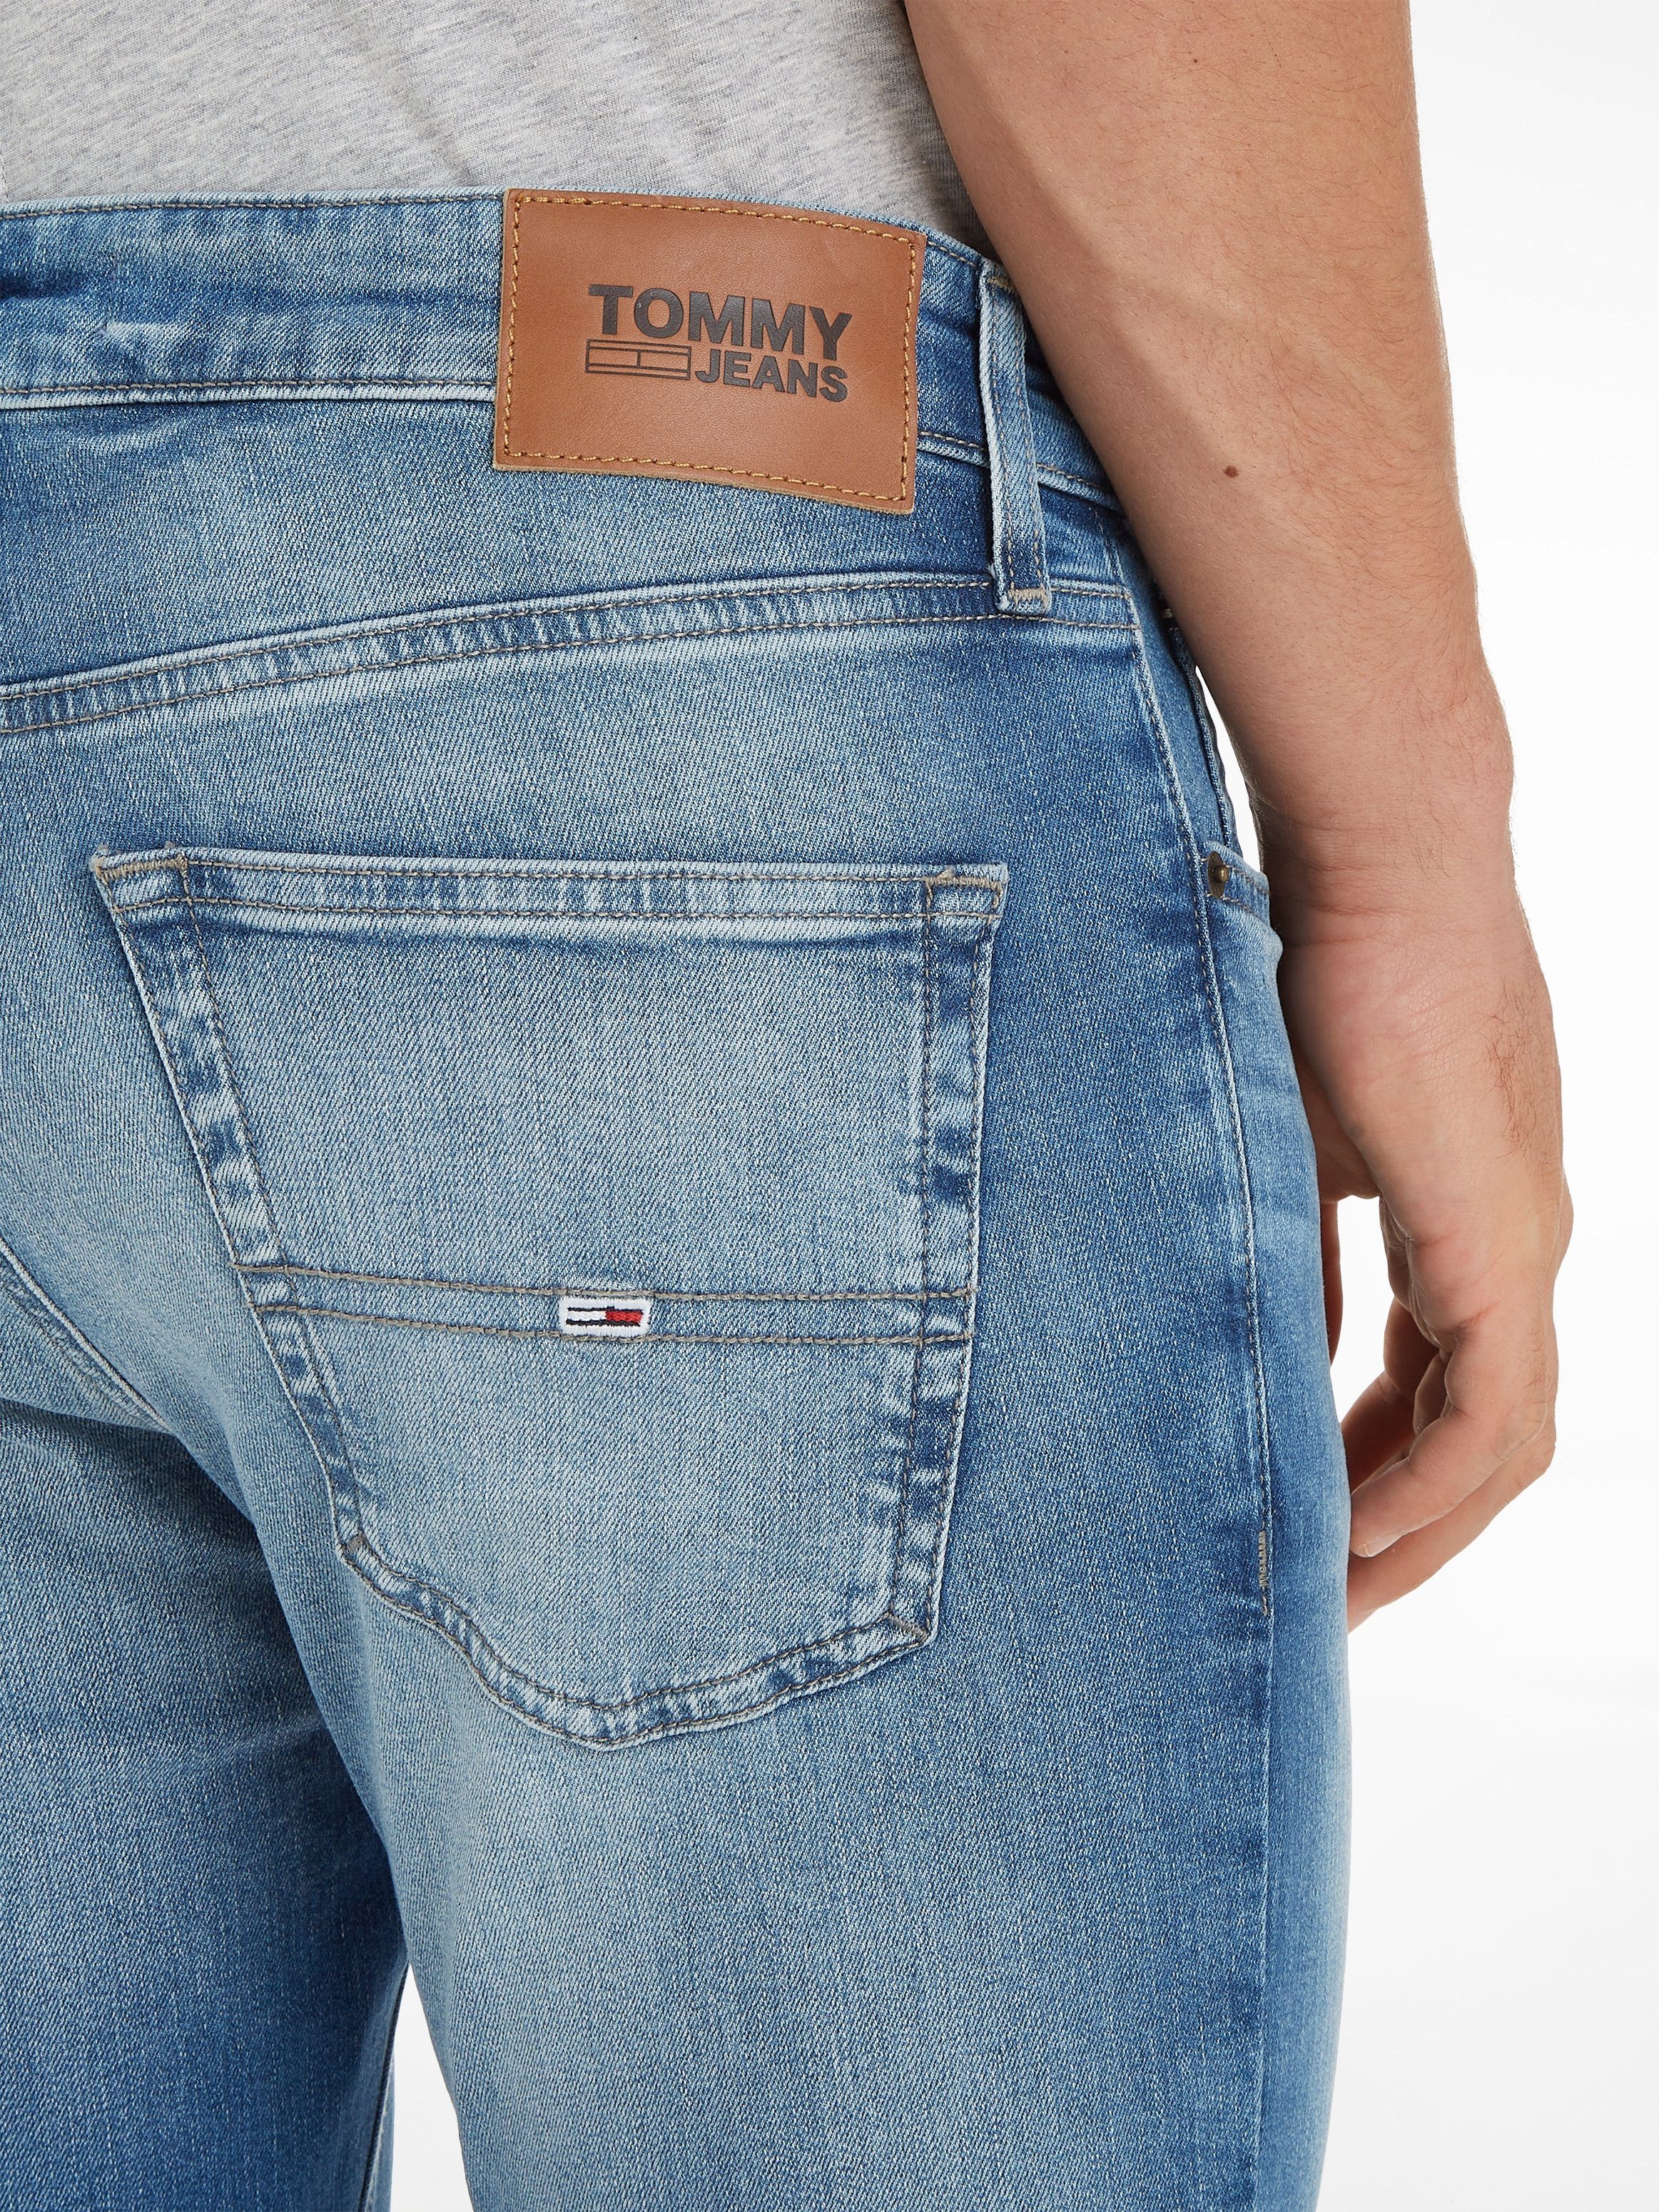 SLIM Light TAPERED Jeans Tapered-fit-Jeans Tommy AUSTIN Blue